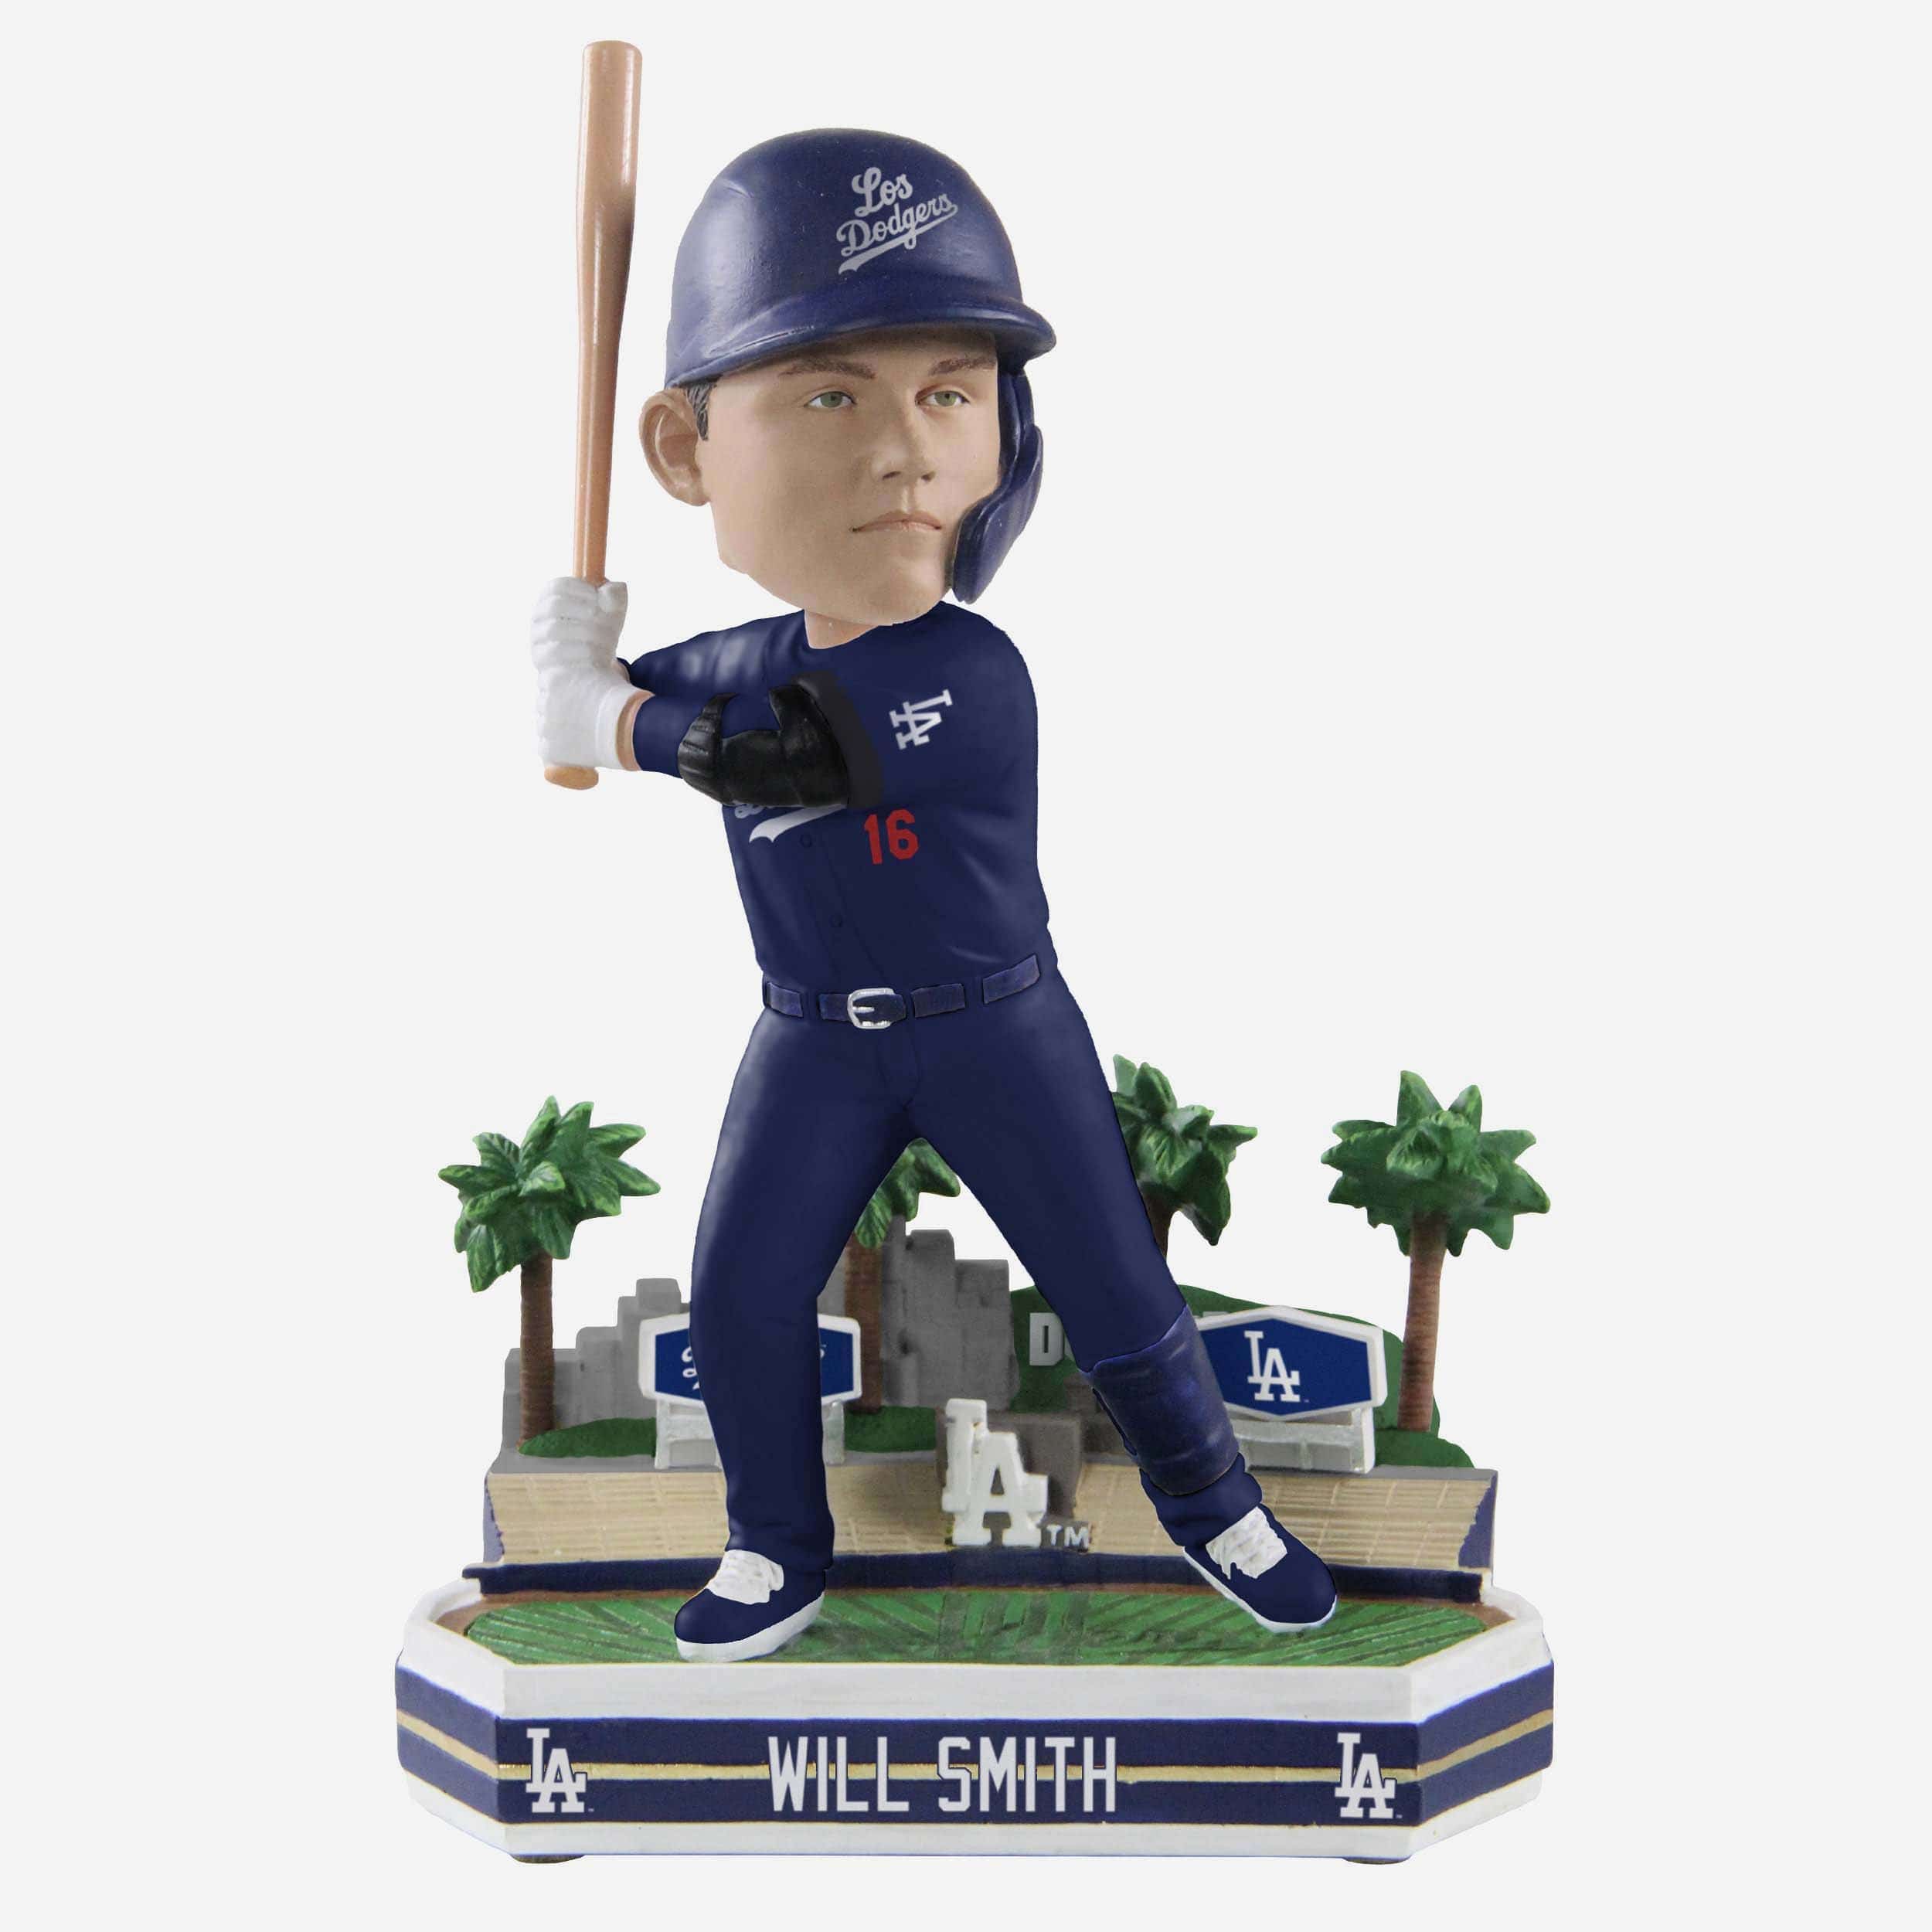 Dodgers Bobble-ARM?!? 🤯 Will Smith Limited Edition Bobblehead crazy  feature keeps HATERS in line 😤🤬 